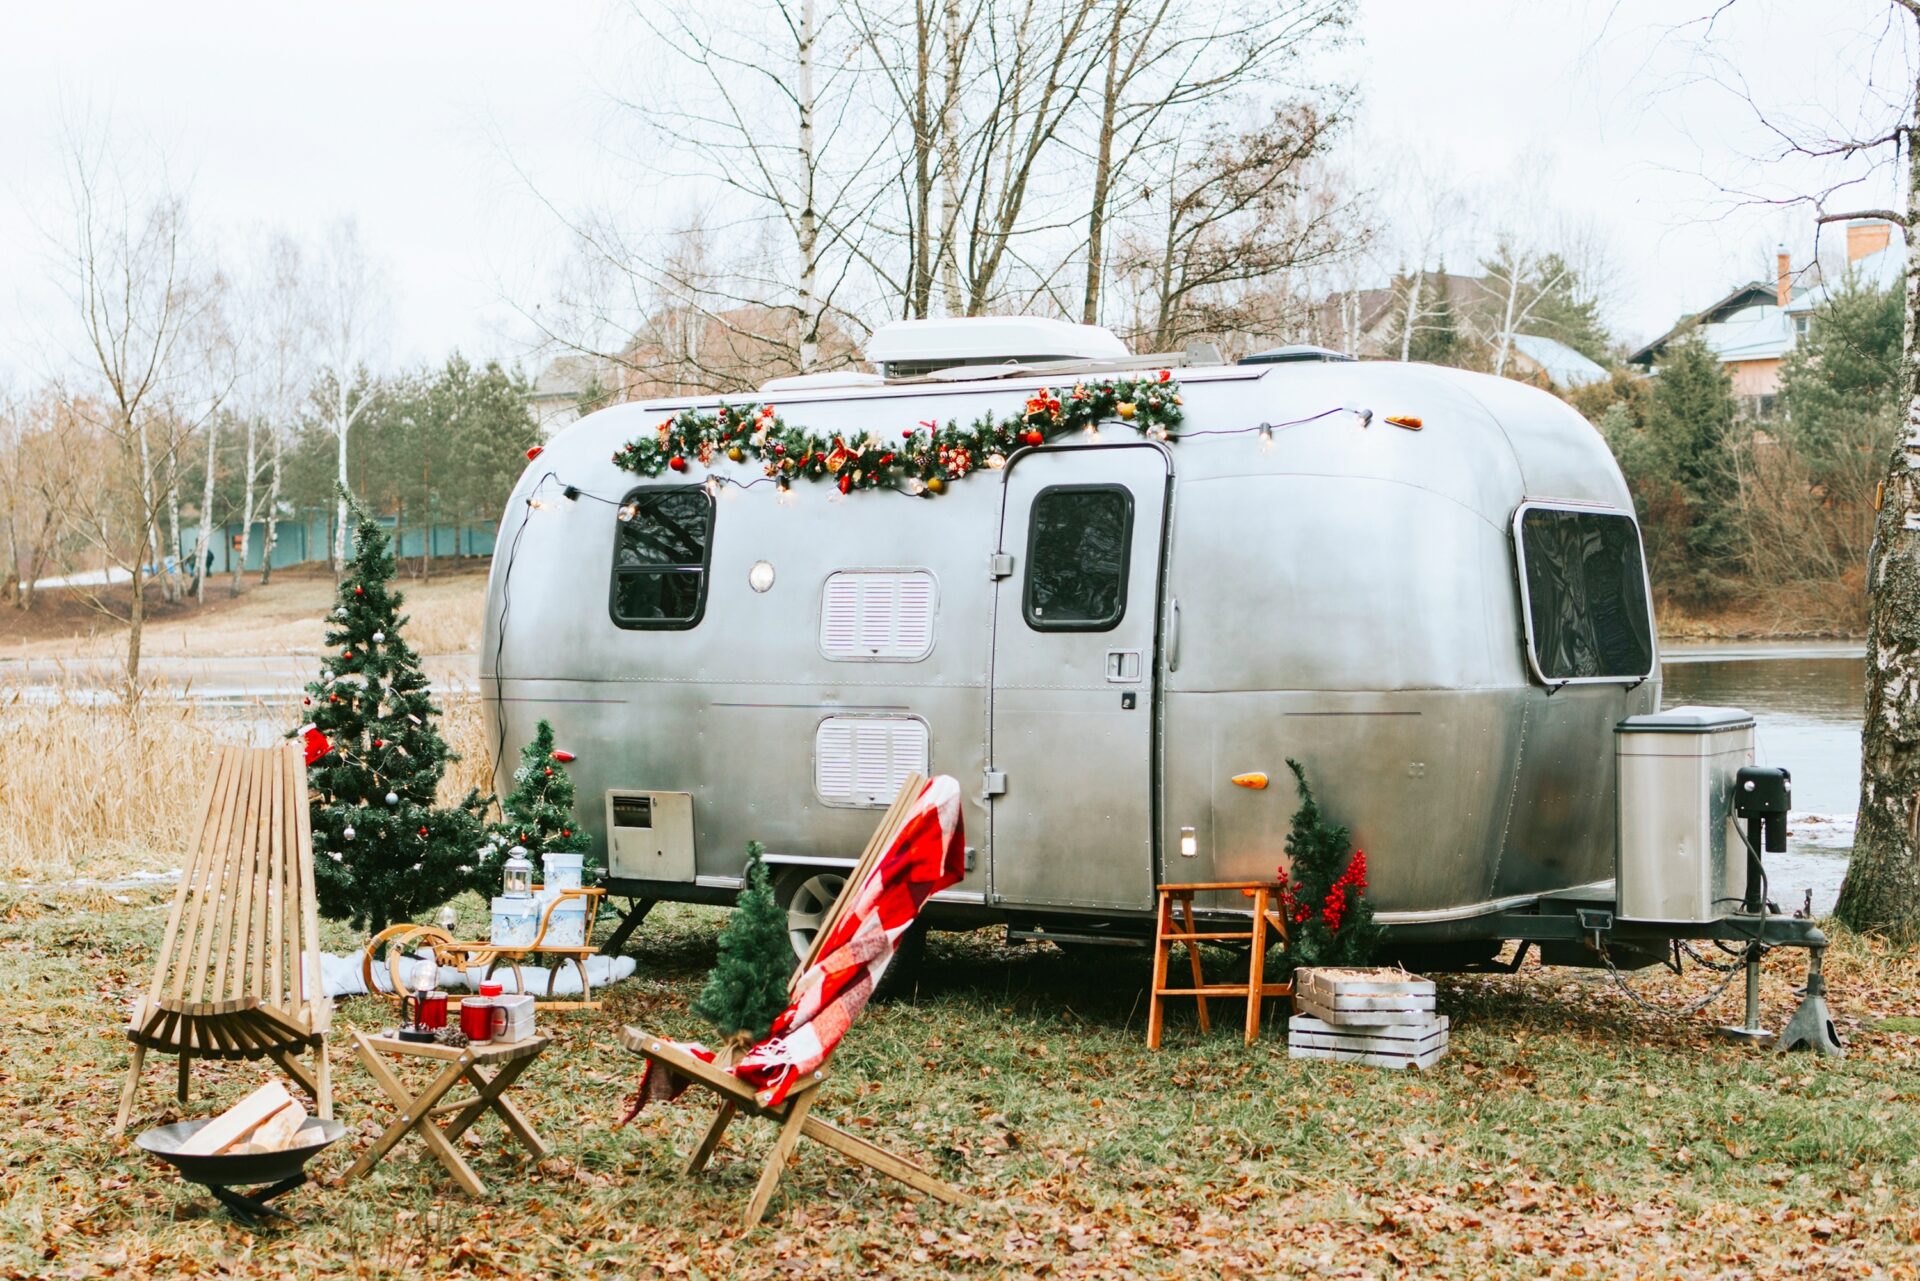 Get the Free Guide to Celebrating the Holidays at the Campground